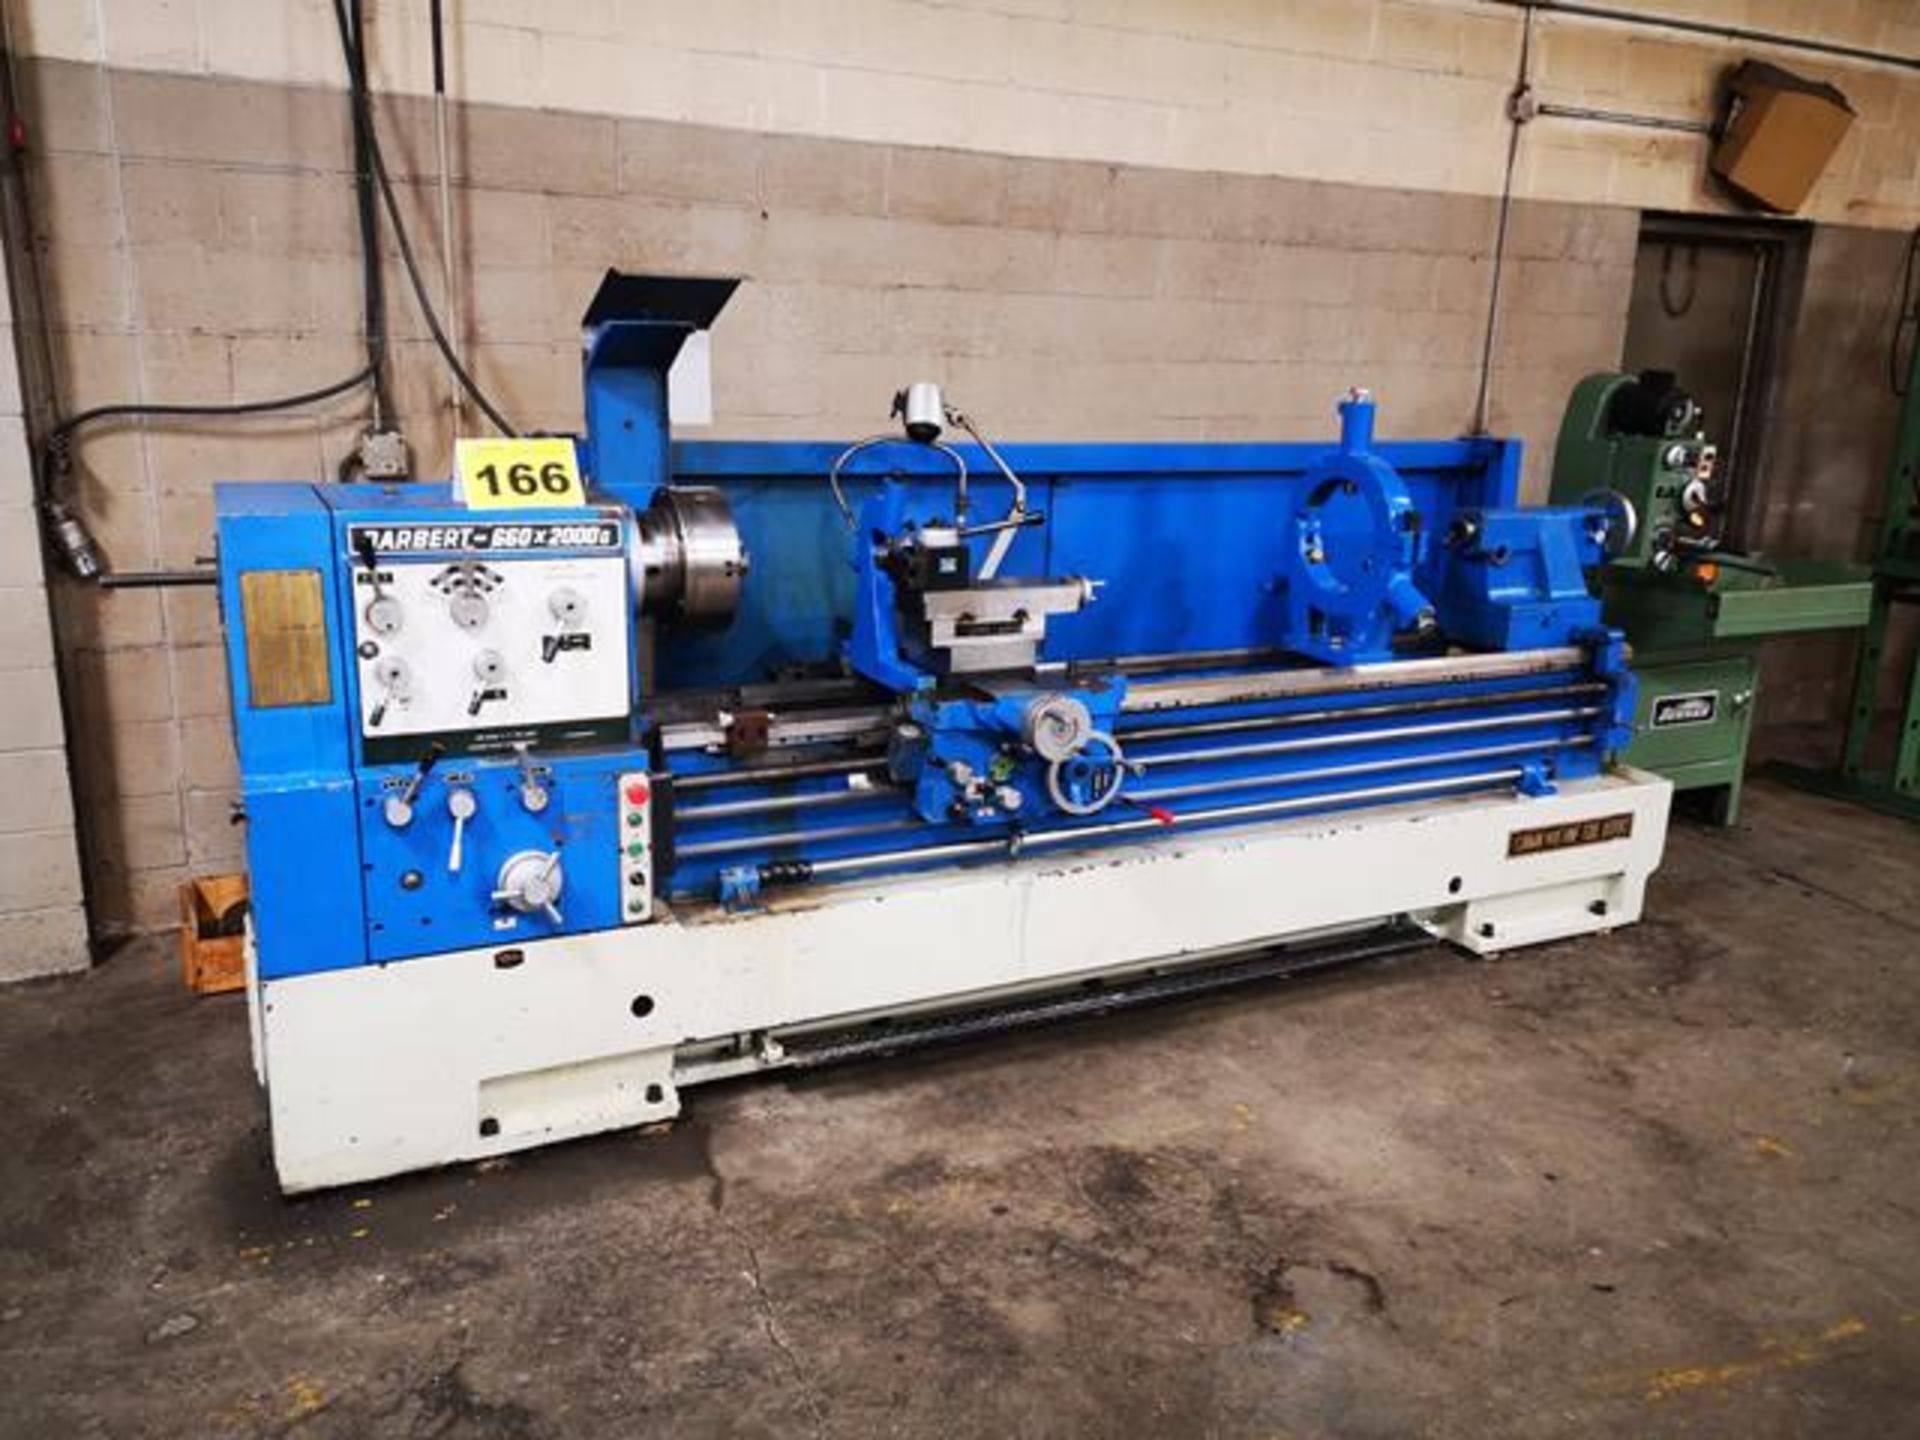 DARBERT, 660MM X 2000MM, GAP BED ENGINE LATHE, 10 HP, 3" SPINDLE BORE, 26" SWING, 80 INCHES